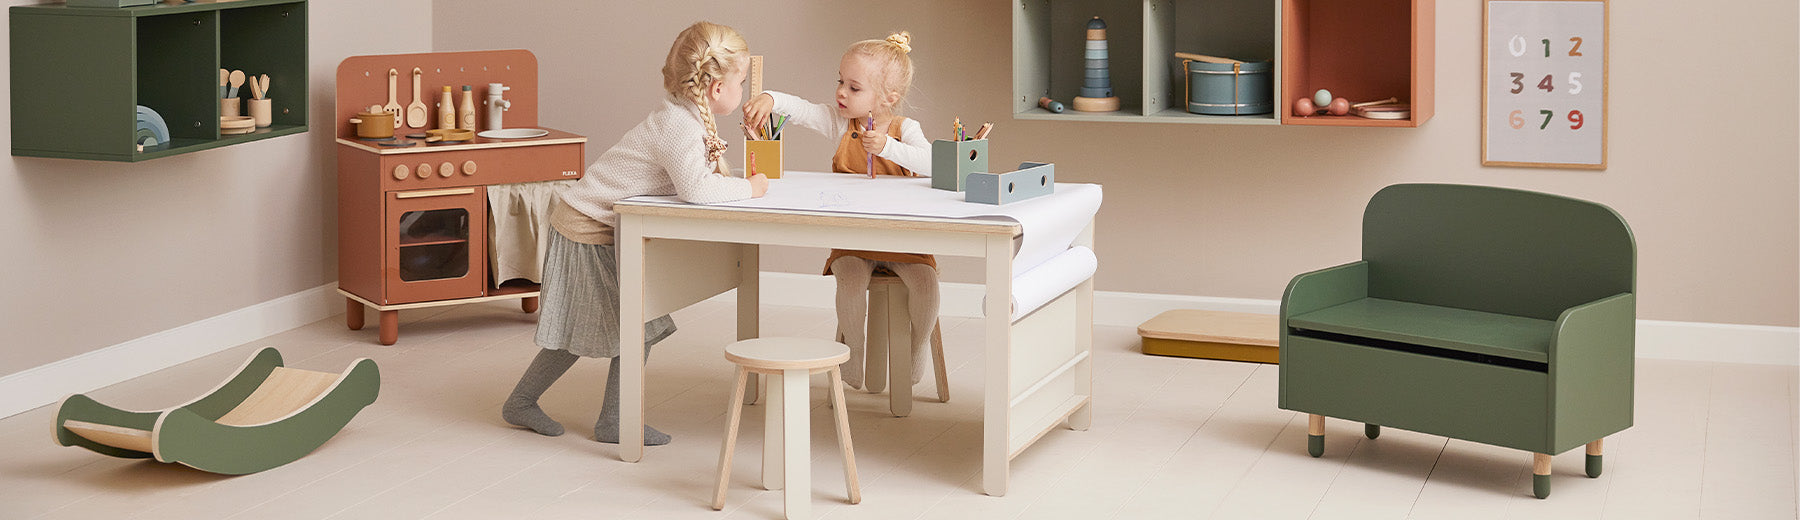 Girls playing with creative table and toys from FLEXA